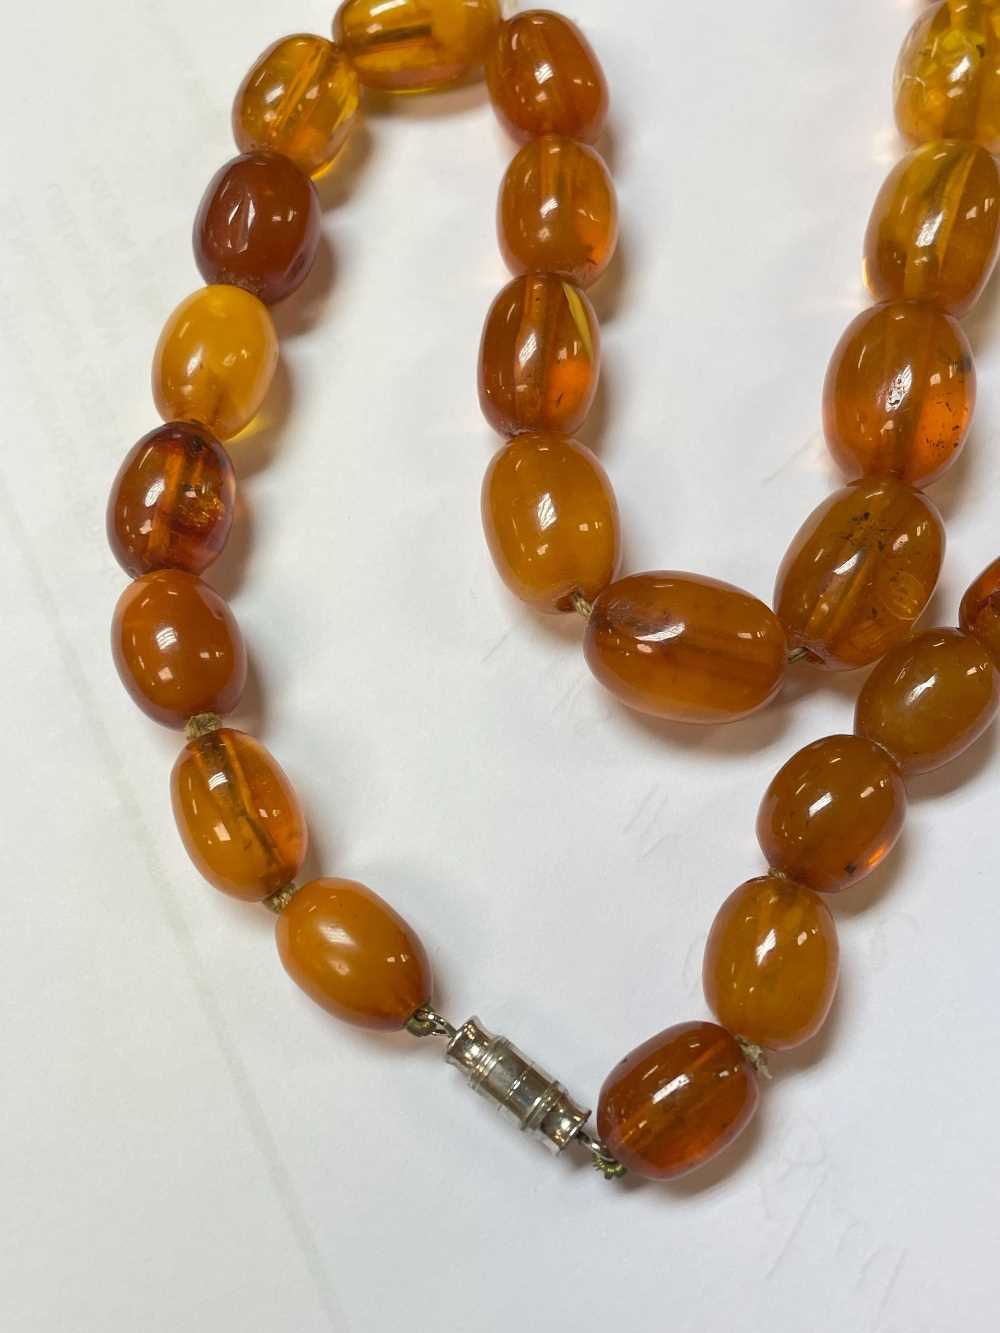 SINGLE STRAND AMBER BEAD NECKLACE, beads 13mm to 20mm, approx gross wt. 55gms - Image 2 of 13